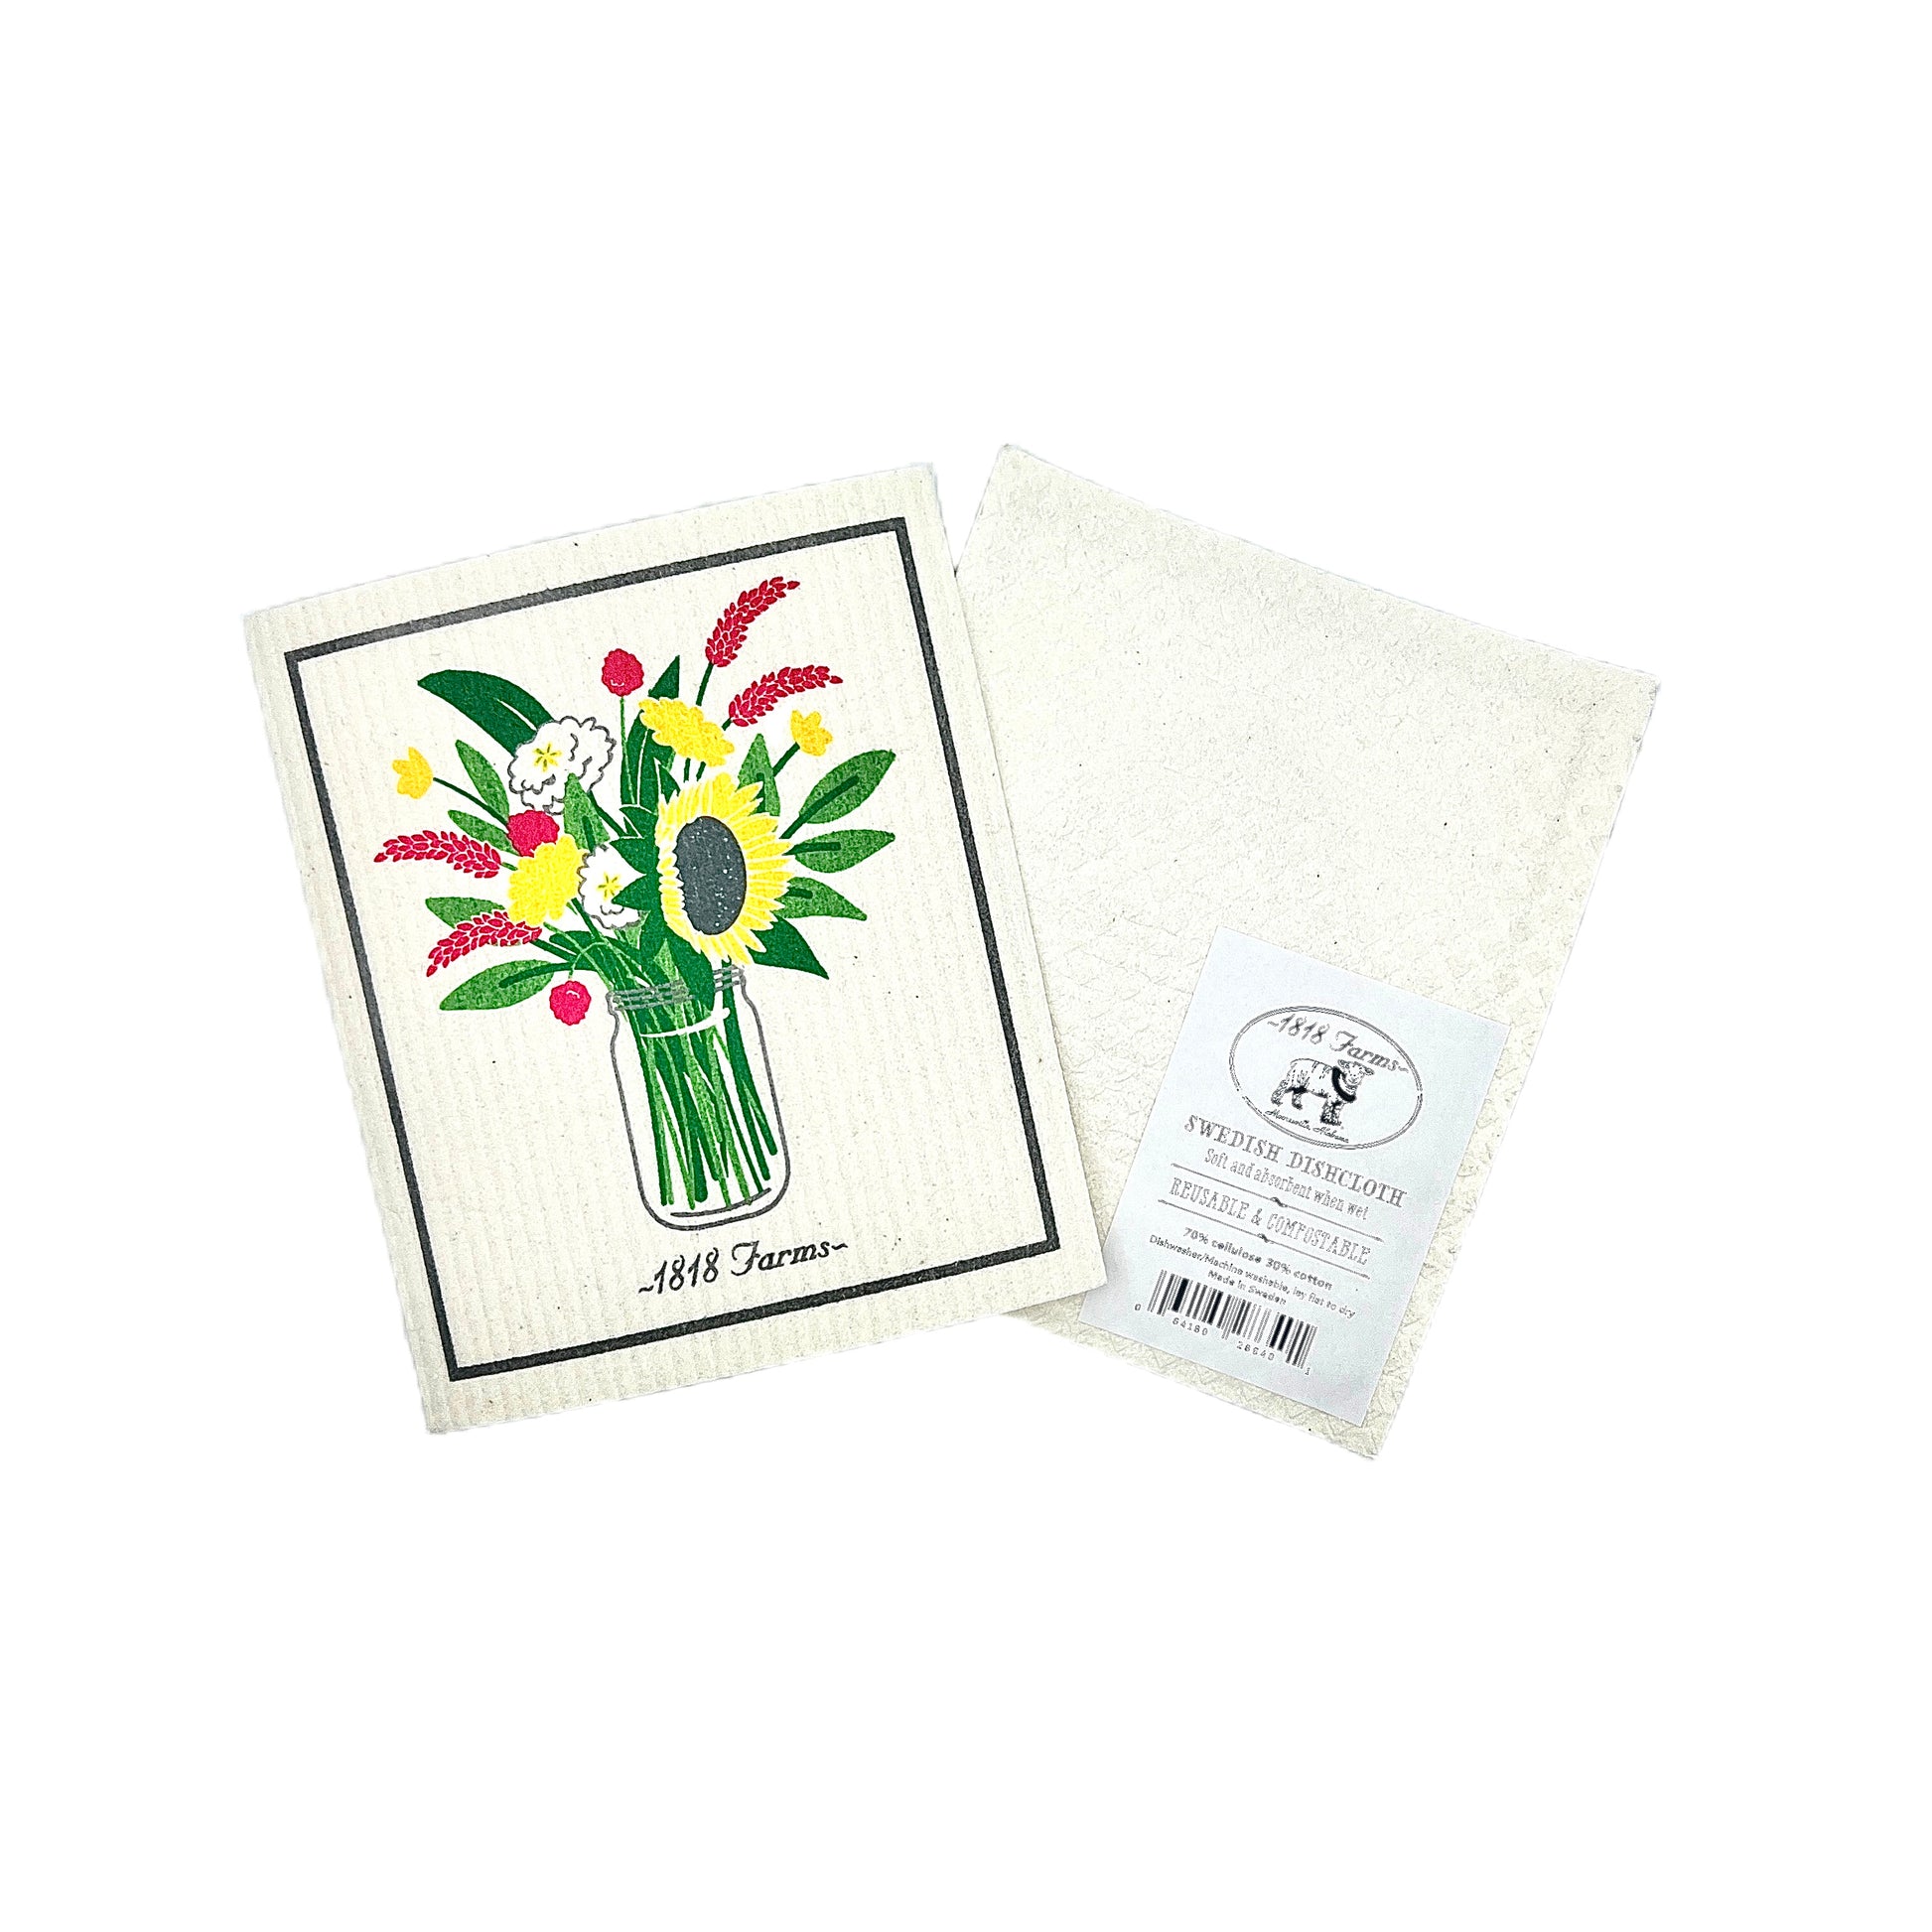 Swedish Dishcloths From Swedish Wholesale Are Stylish, Reusable and  Eco-Friendly Too